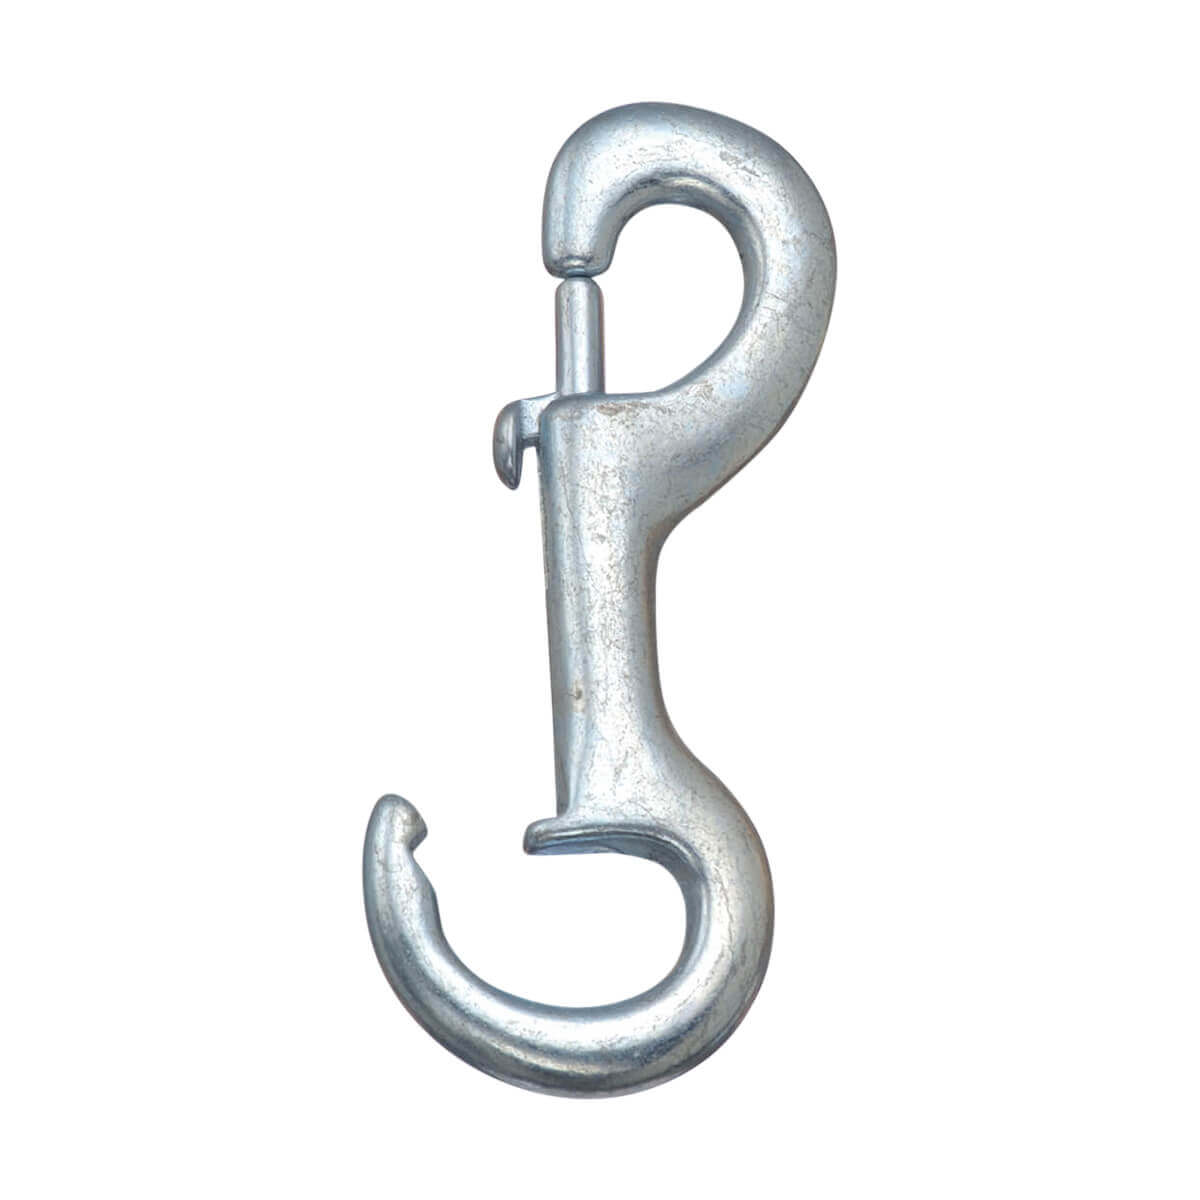 Zinc Plated Malleable Iron Cold Shut Snap - 3-1/2-in